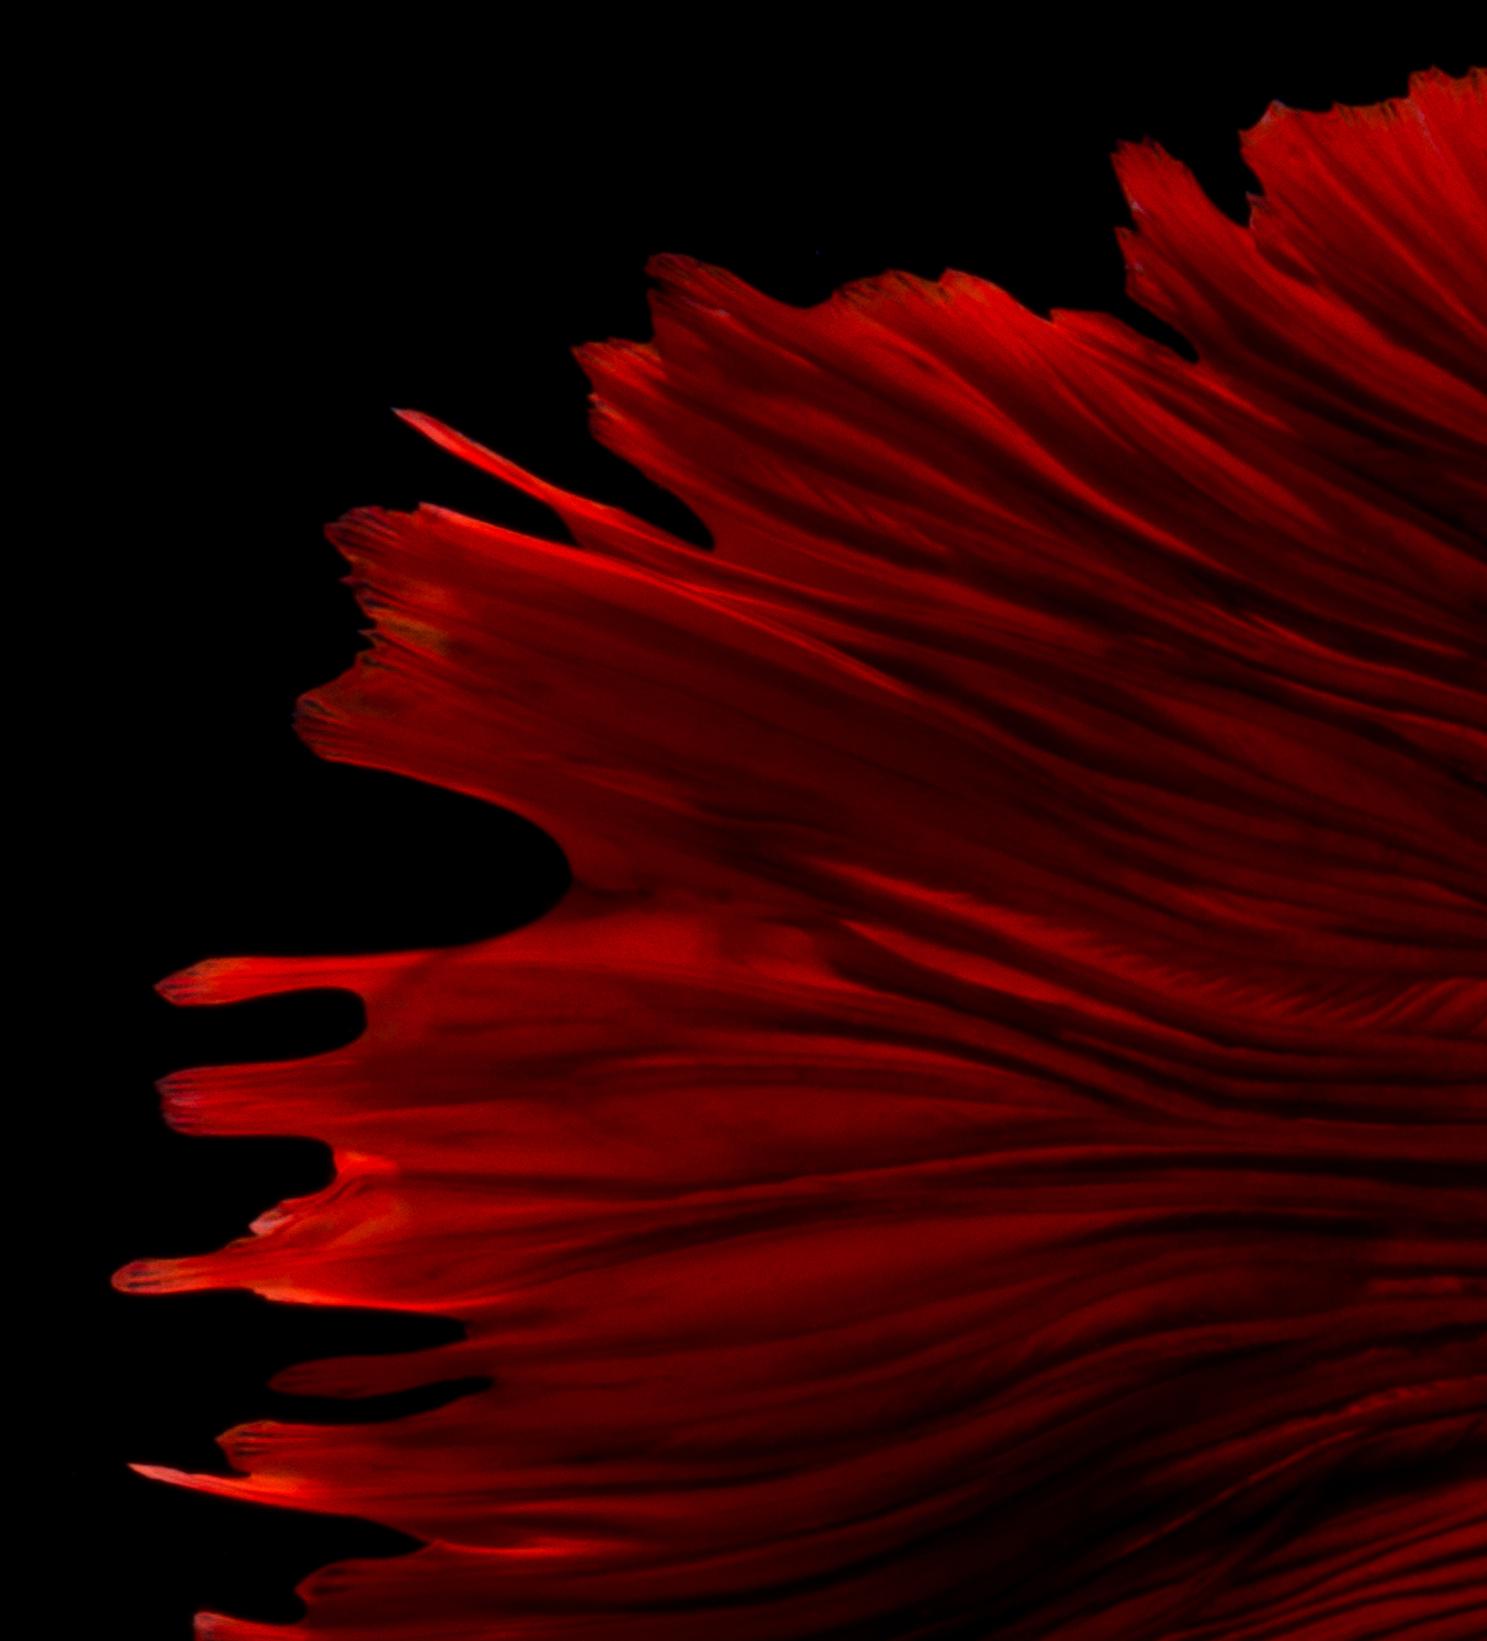 Africa : abstract photography, portrait of nature, contemporary, red and black - Photograph by Visarute Angkatavanich